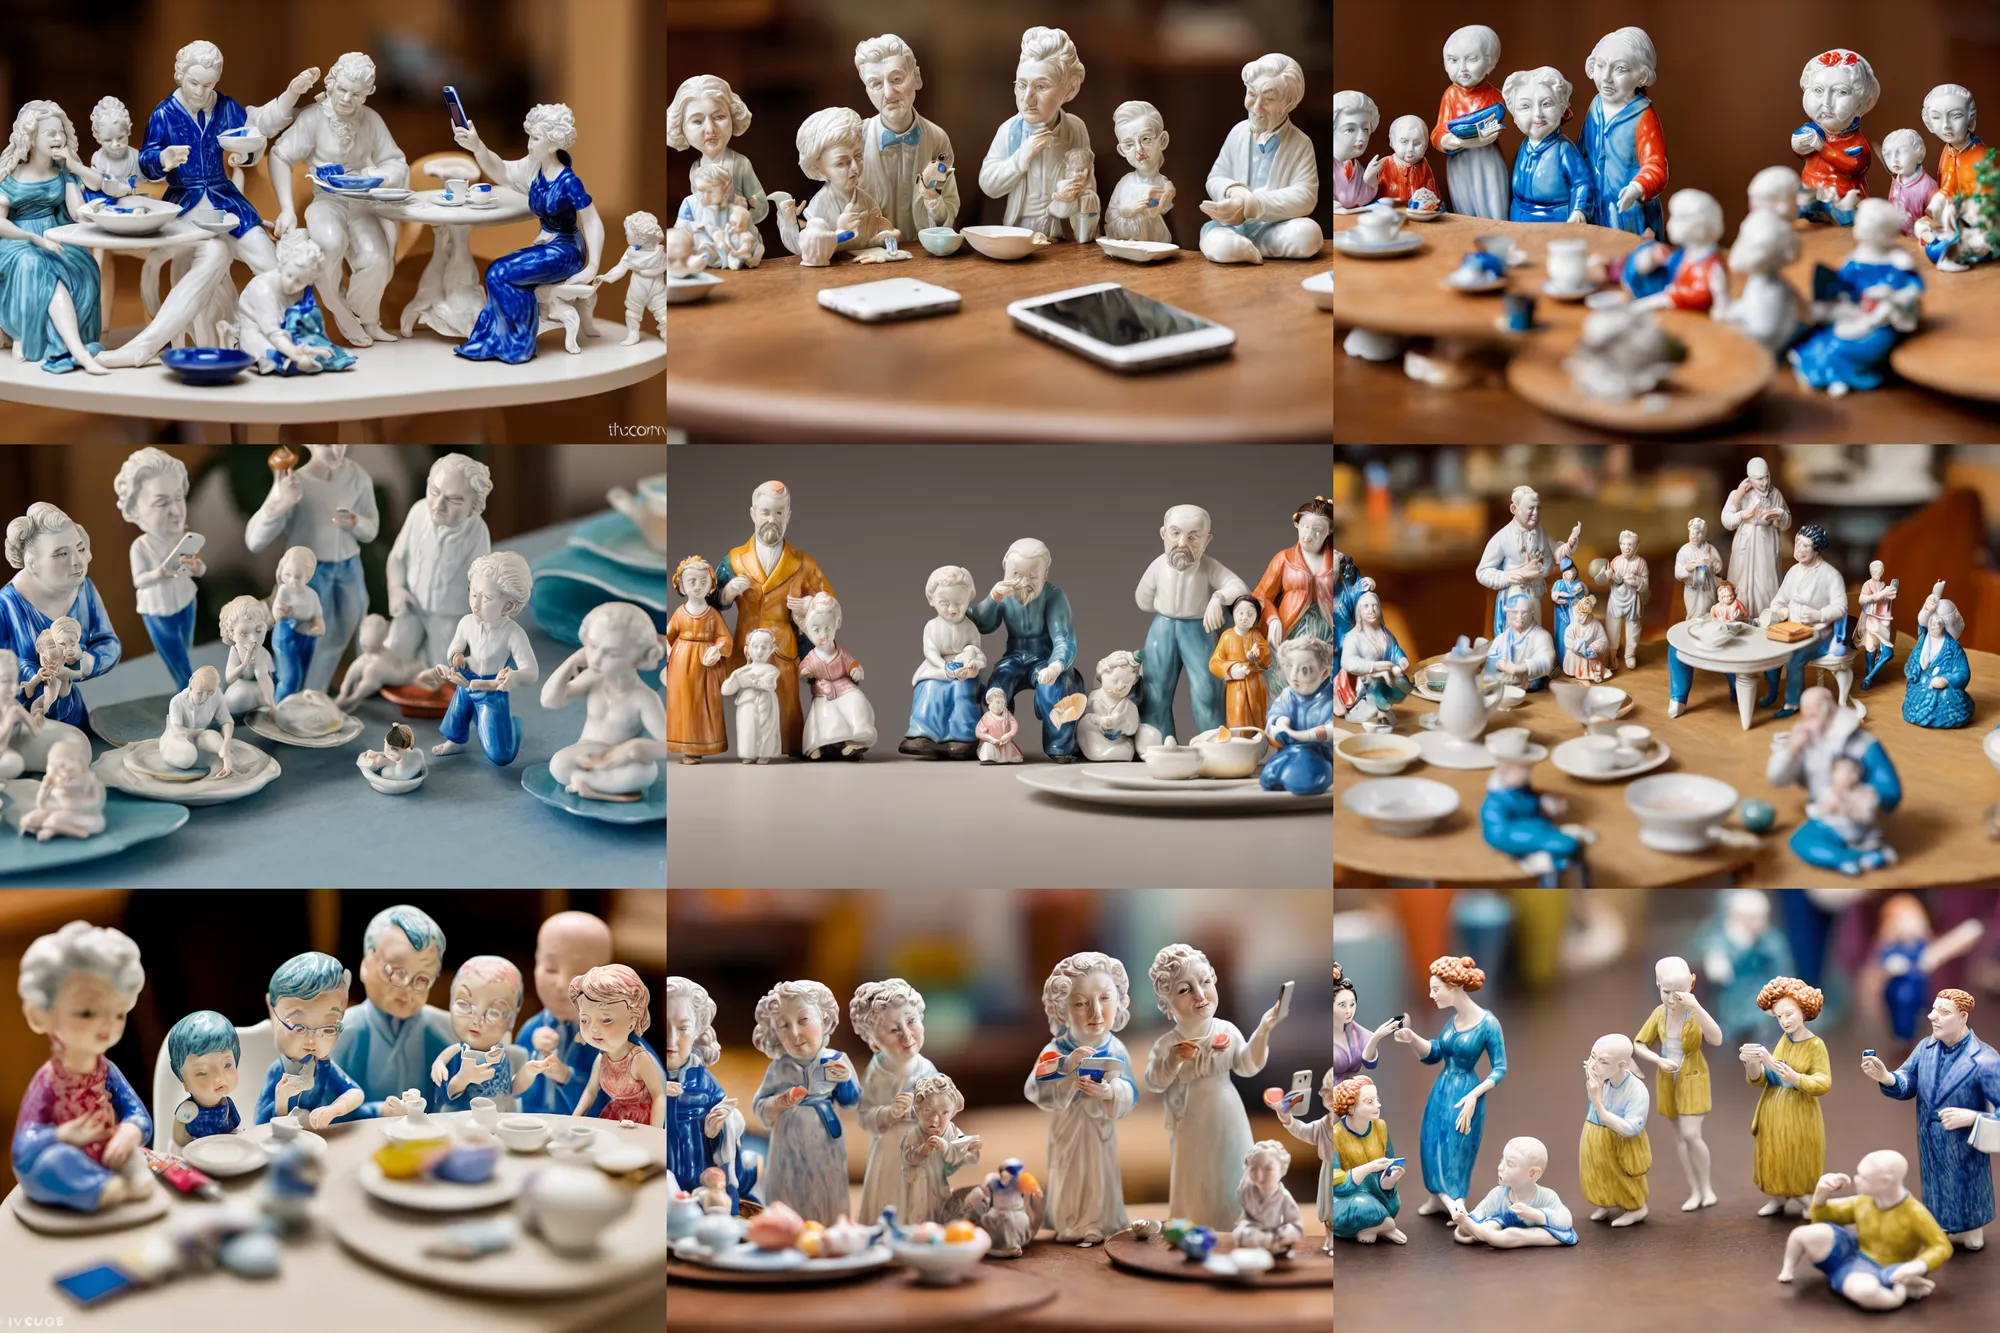 Prompt: A vivid porcelain composition of a family of figurines staring down at their iPhones at a table, amazing craftsmanship, Tamron SP 90mm F/2.8 Di VC USD Macro